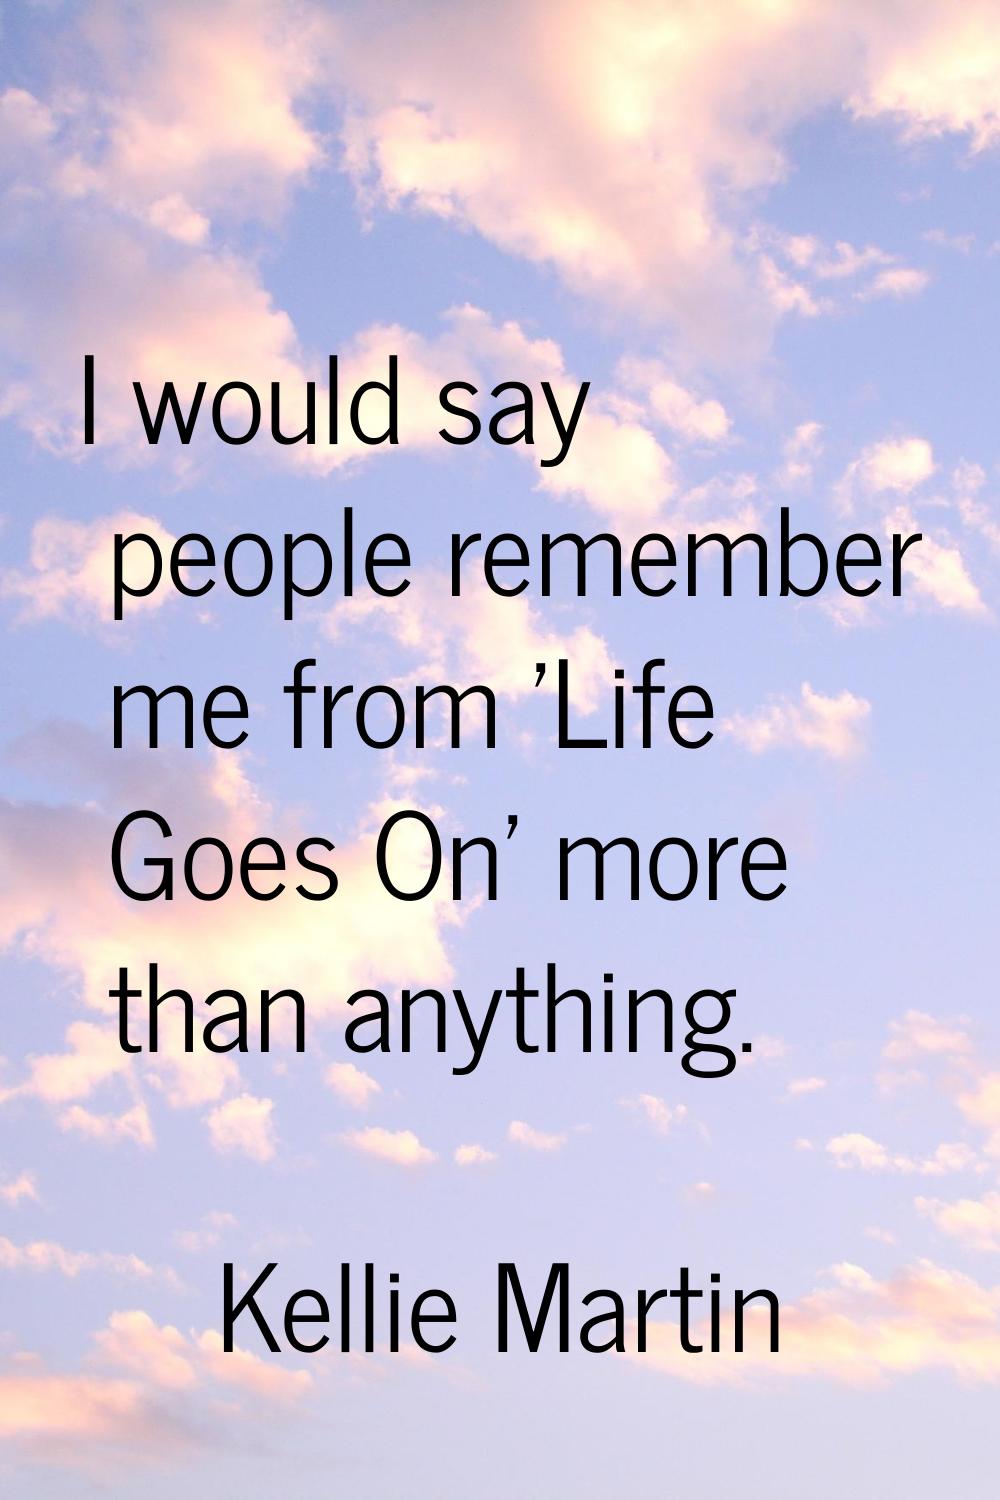 I would say people remember me from 'Life Goes On' more than anything.